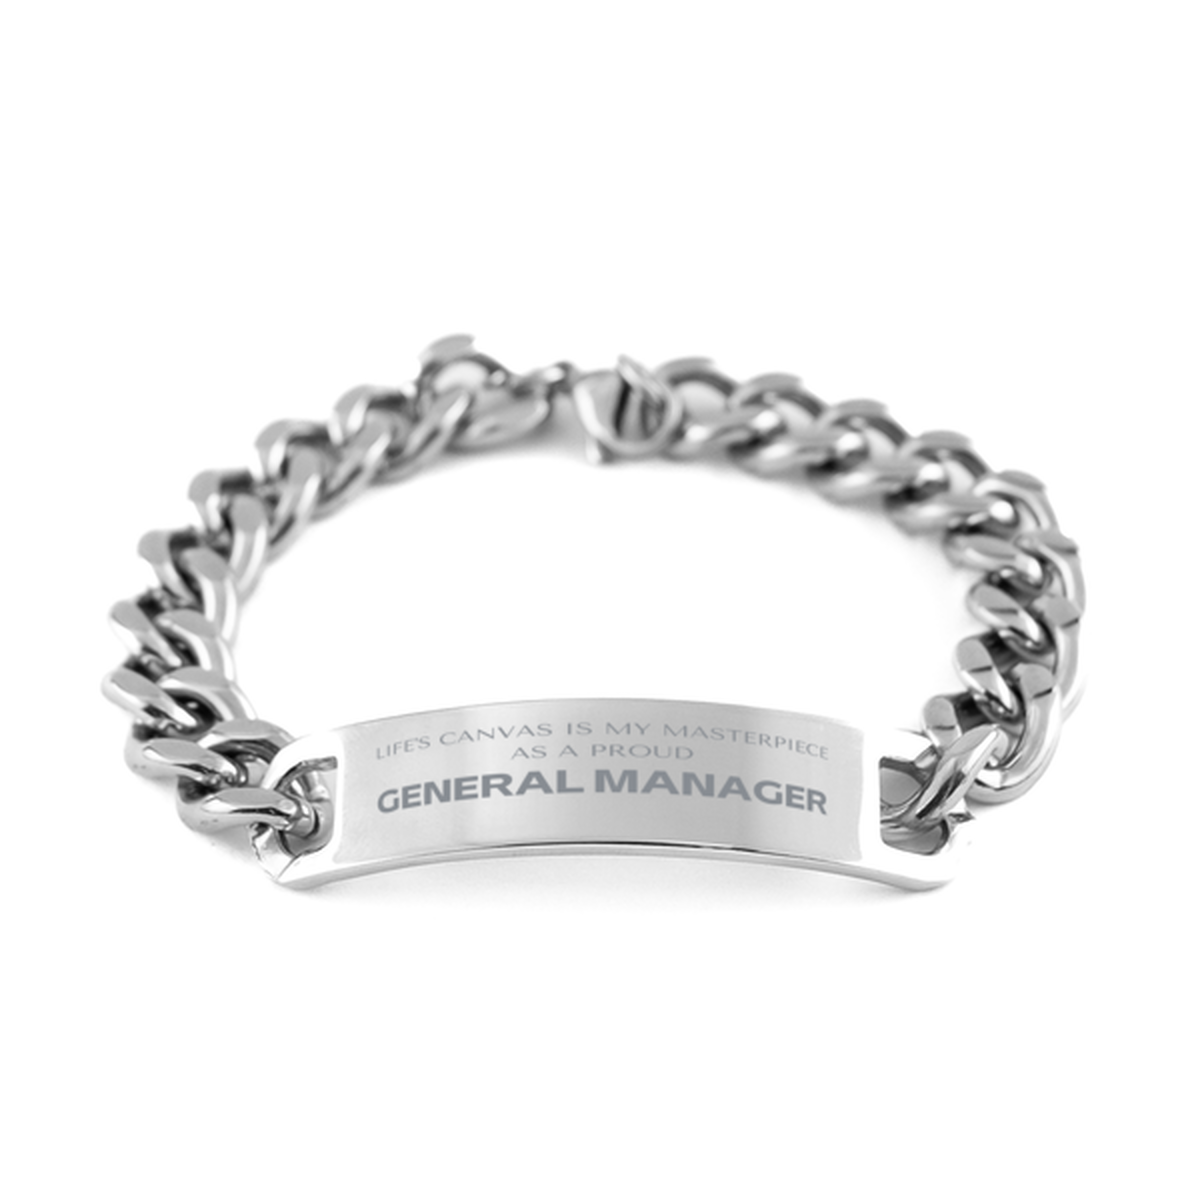 Proud General Manager Gifts, Life's canvas is my masterpiece, Epic Birthday Christmas Unique Cuban Chain Stainless Steel Bracelet For General Manager, Coworkers, Men, Women, Friends